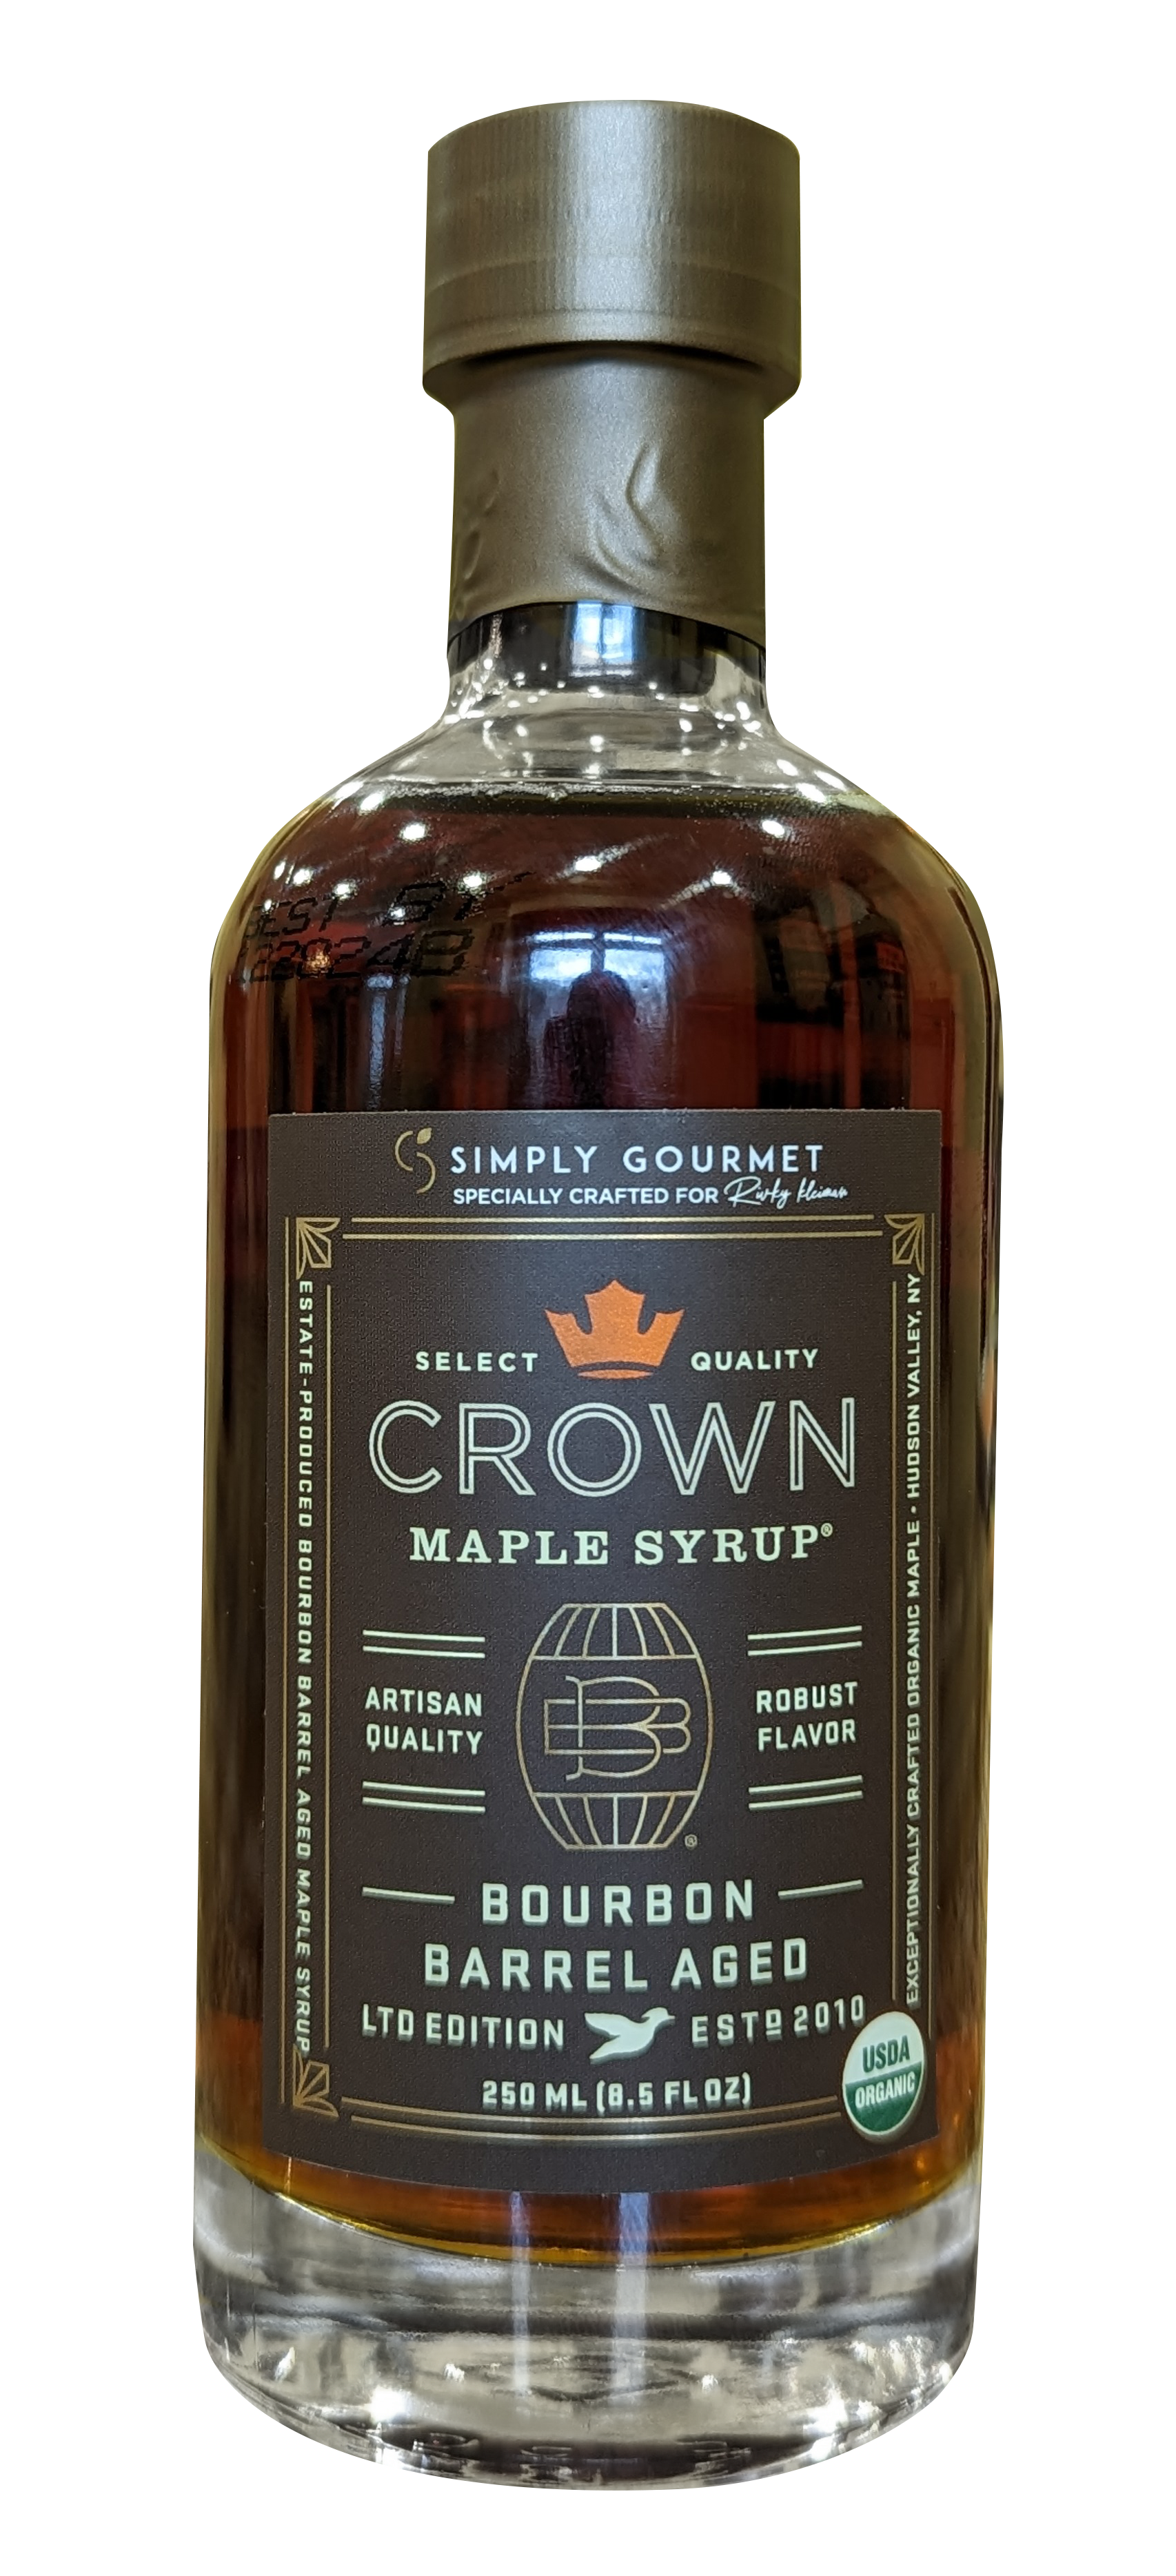 6.7 fl. oz.  Bourbon Barrel Aged Maple Syrup — Marvin's Country Store